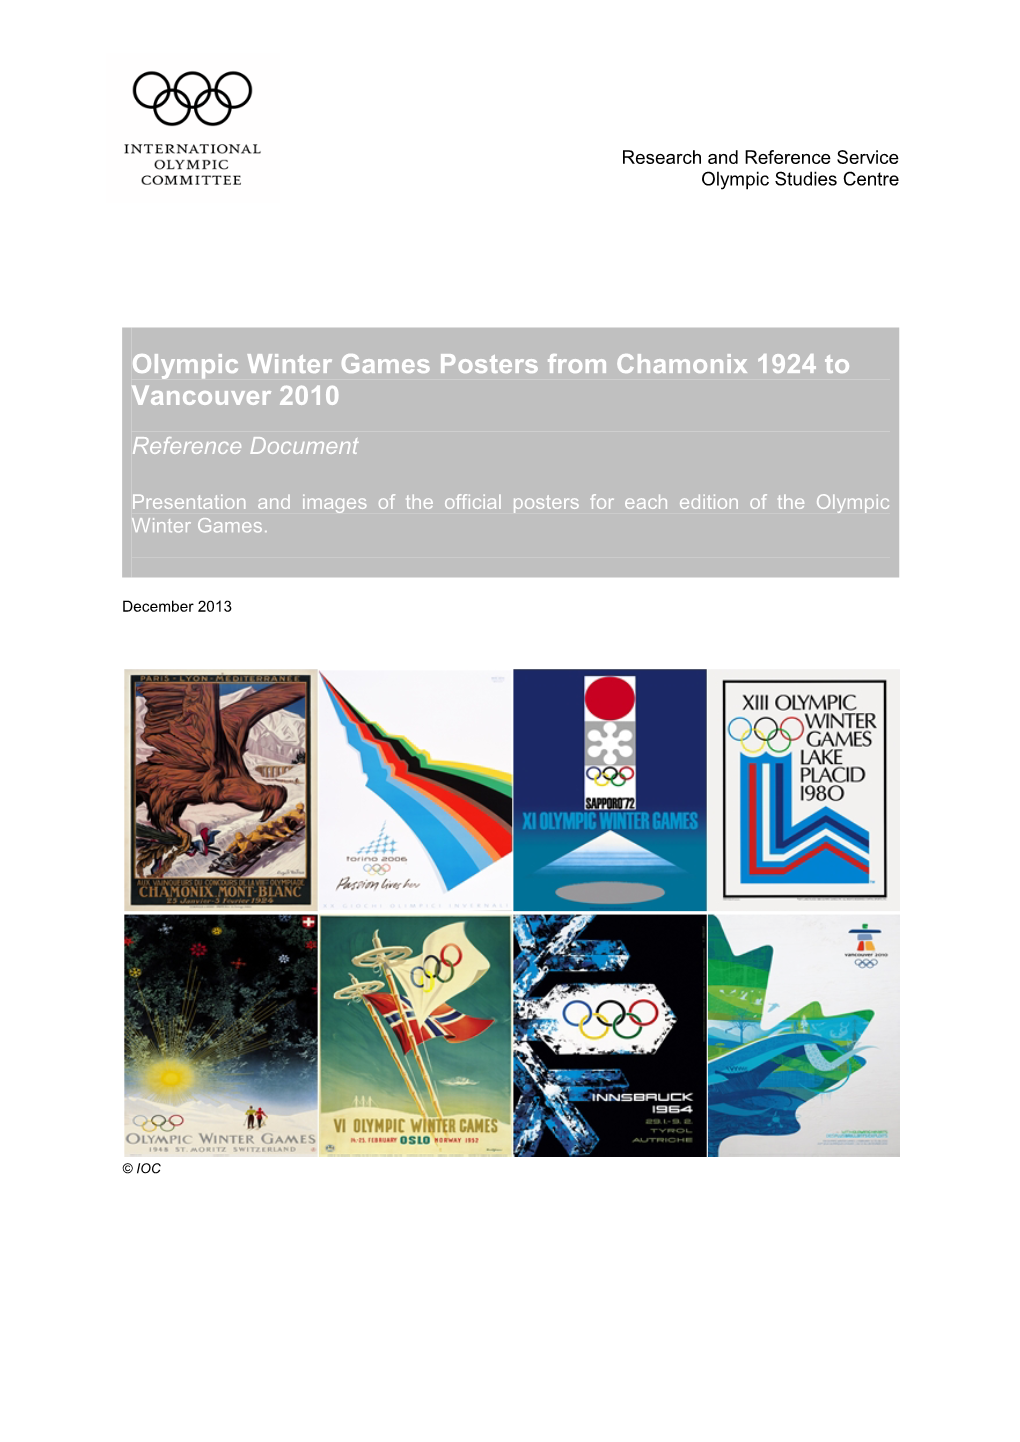 Olympic Winter Games Posters from Chamonix 1924 to Vancouver 2010 Reference Document